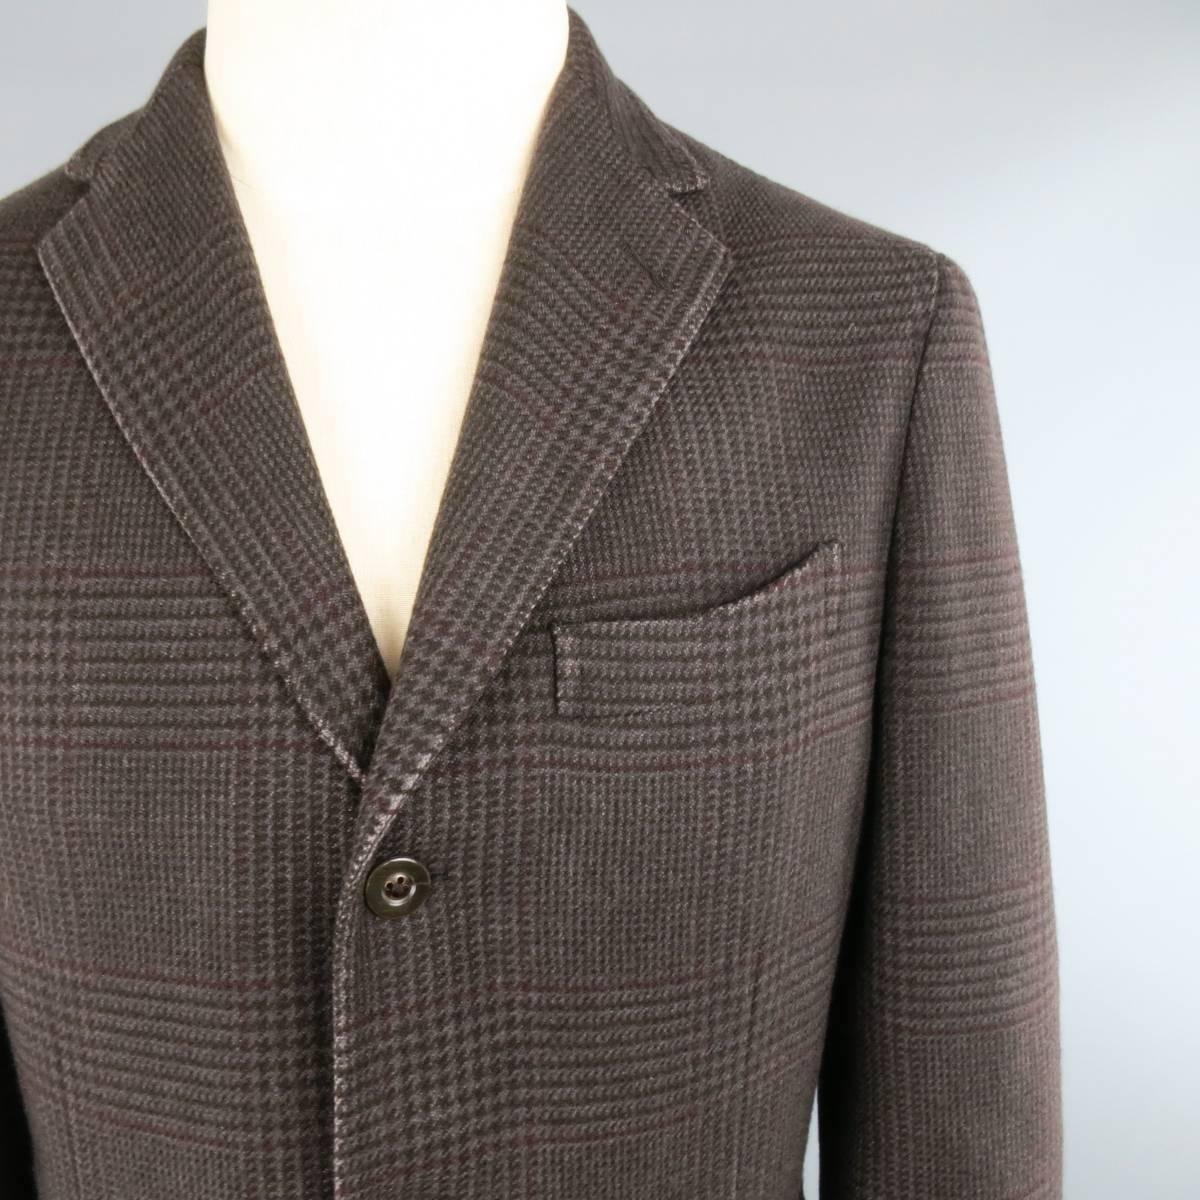 BOGLIOLI Sport Coat consists of cashmere material in a brown color tone. Designed in a notch lapel collar, 3-button front and plaid pattern. Detailed with a top pocket square and bottom patch pockets. 4-button cuffs, double back vent and